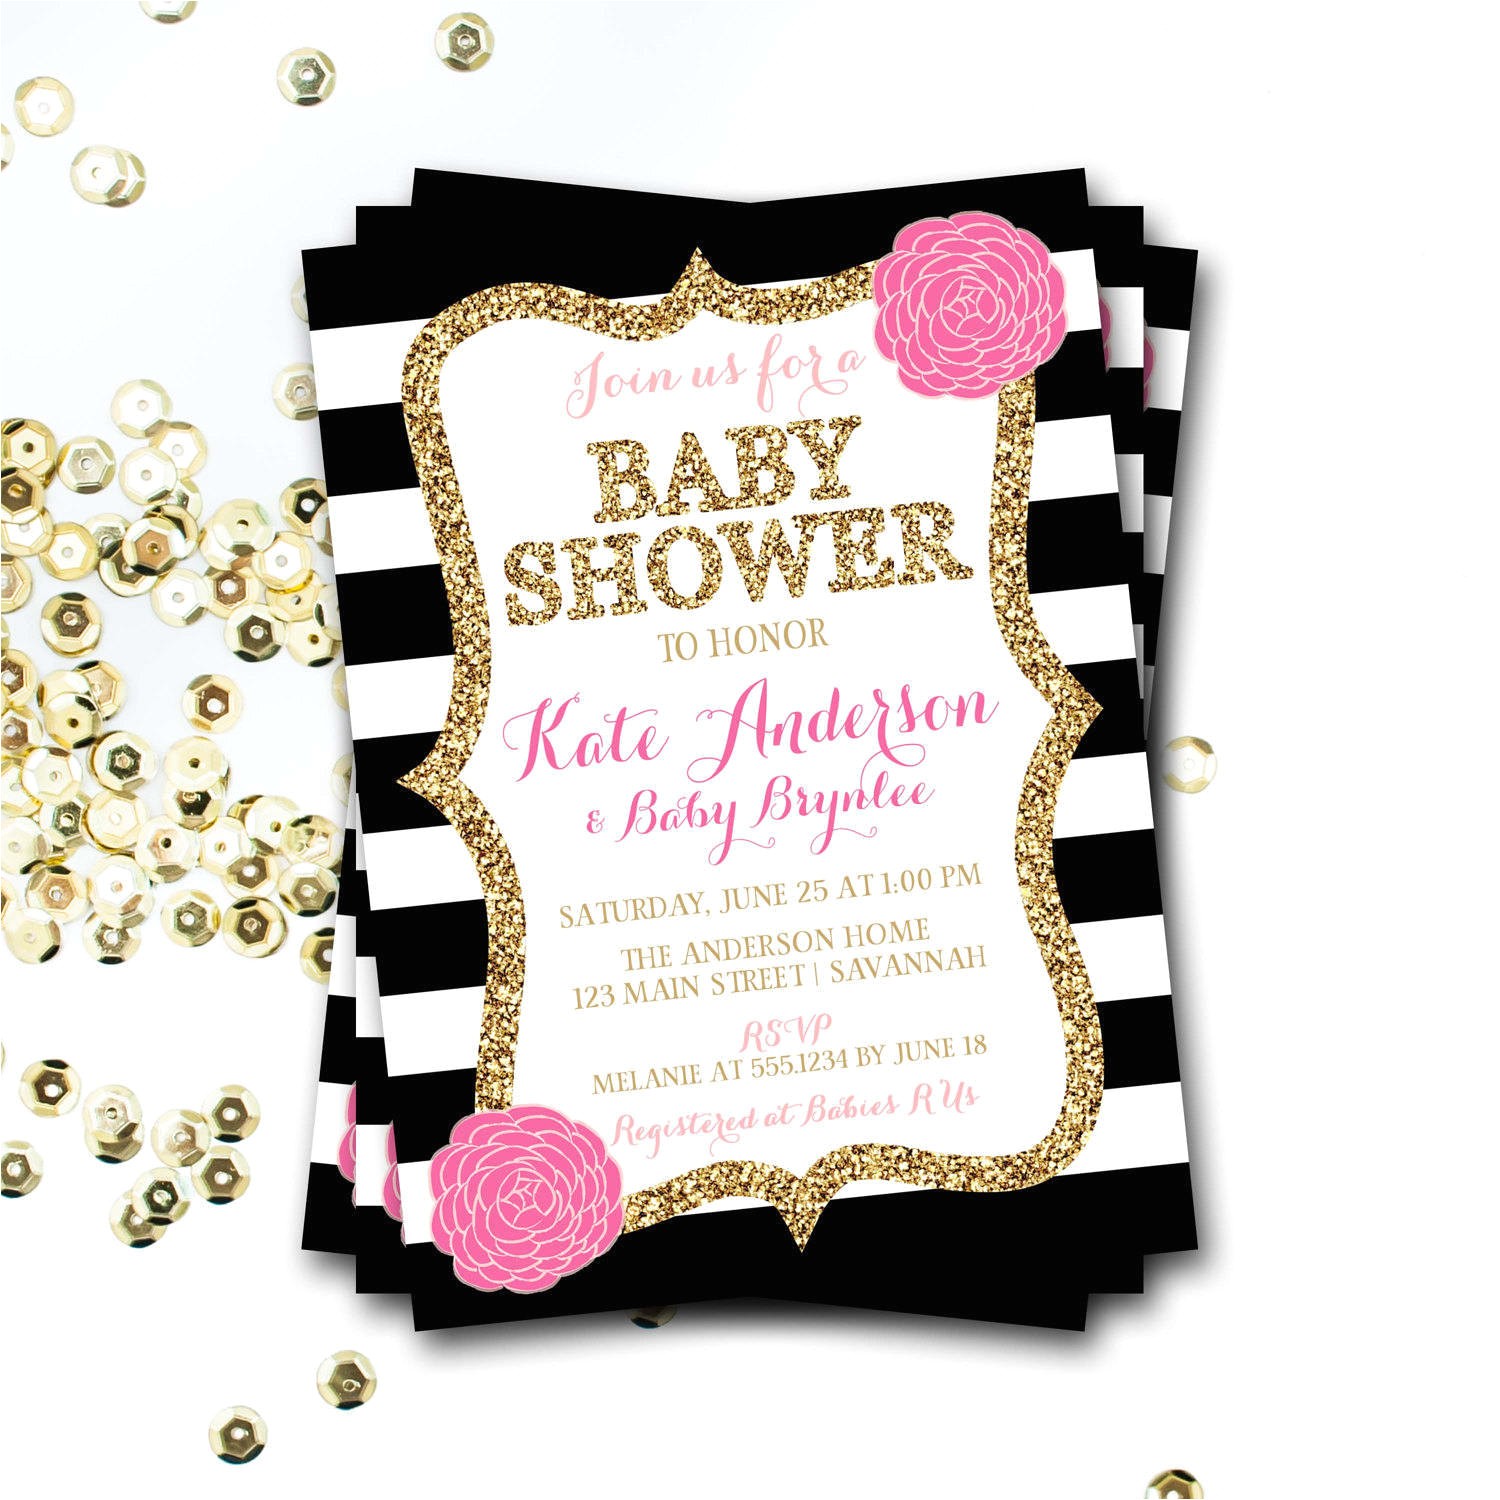 Black White and Pink Baby Shower Invitations Pink Black and White Baby Shower Invitation Pink and